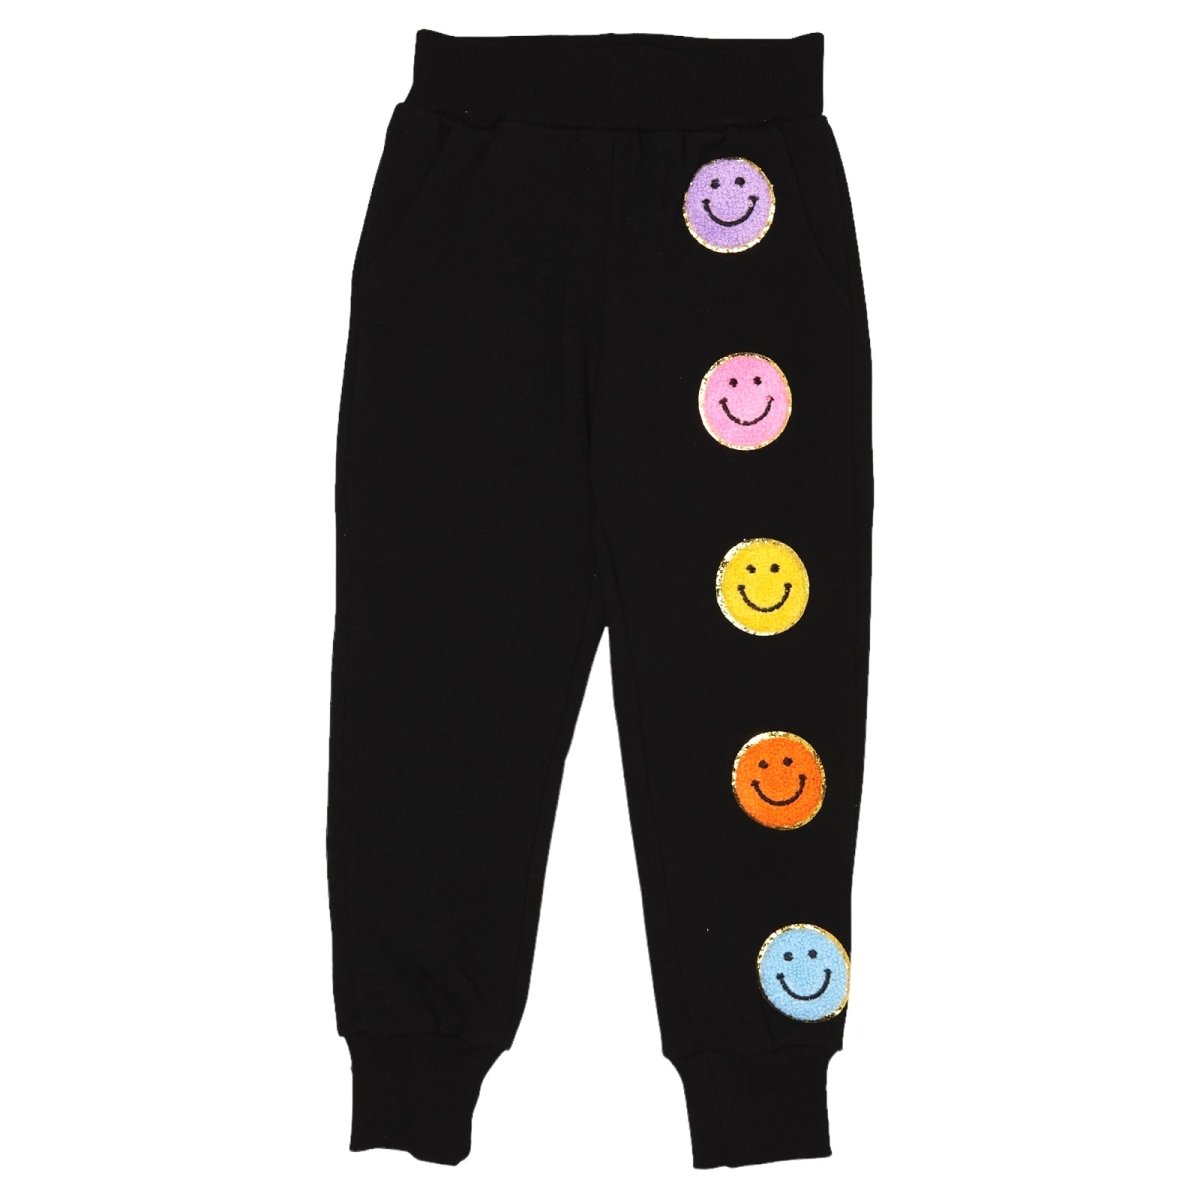 SMILEY PATCHES SWEATPANTS - LOLA AND THE BOYS